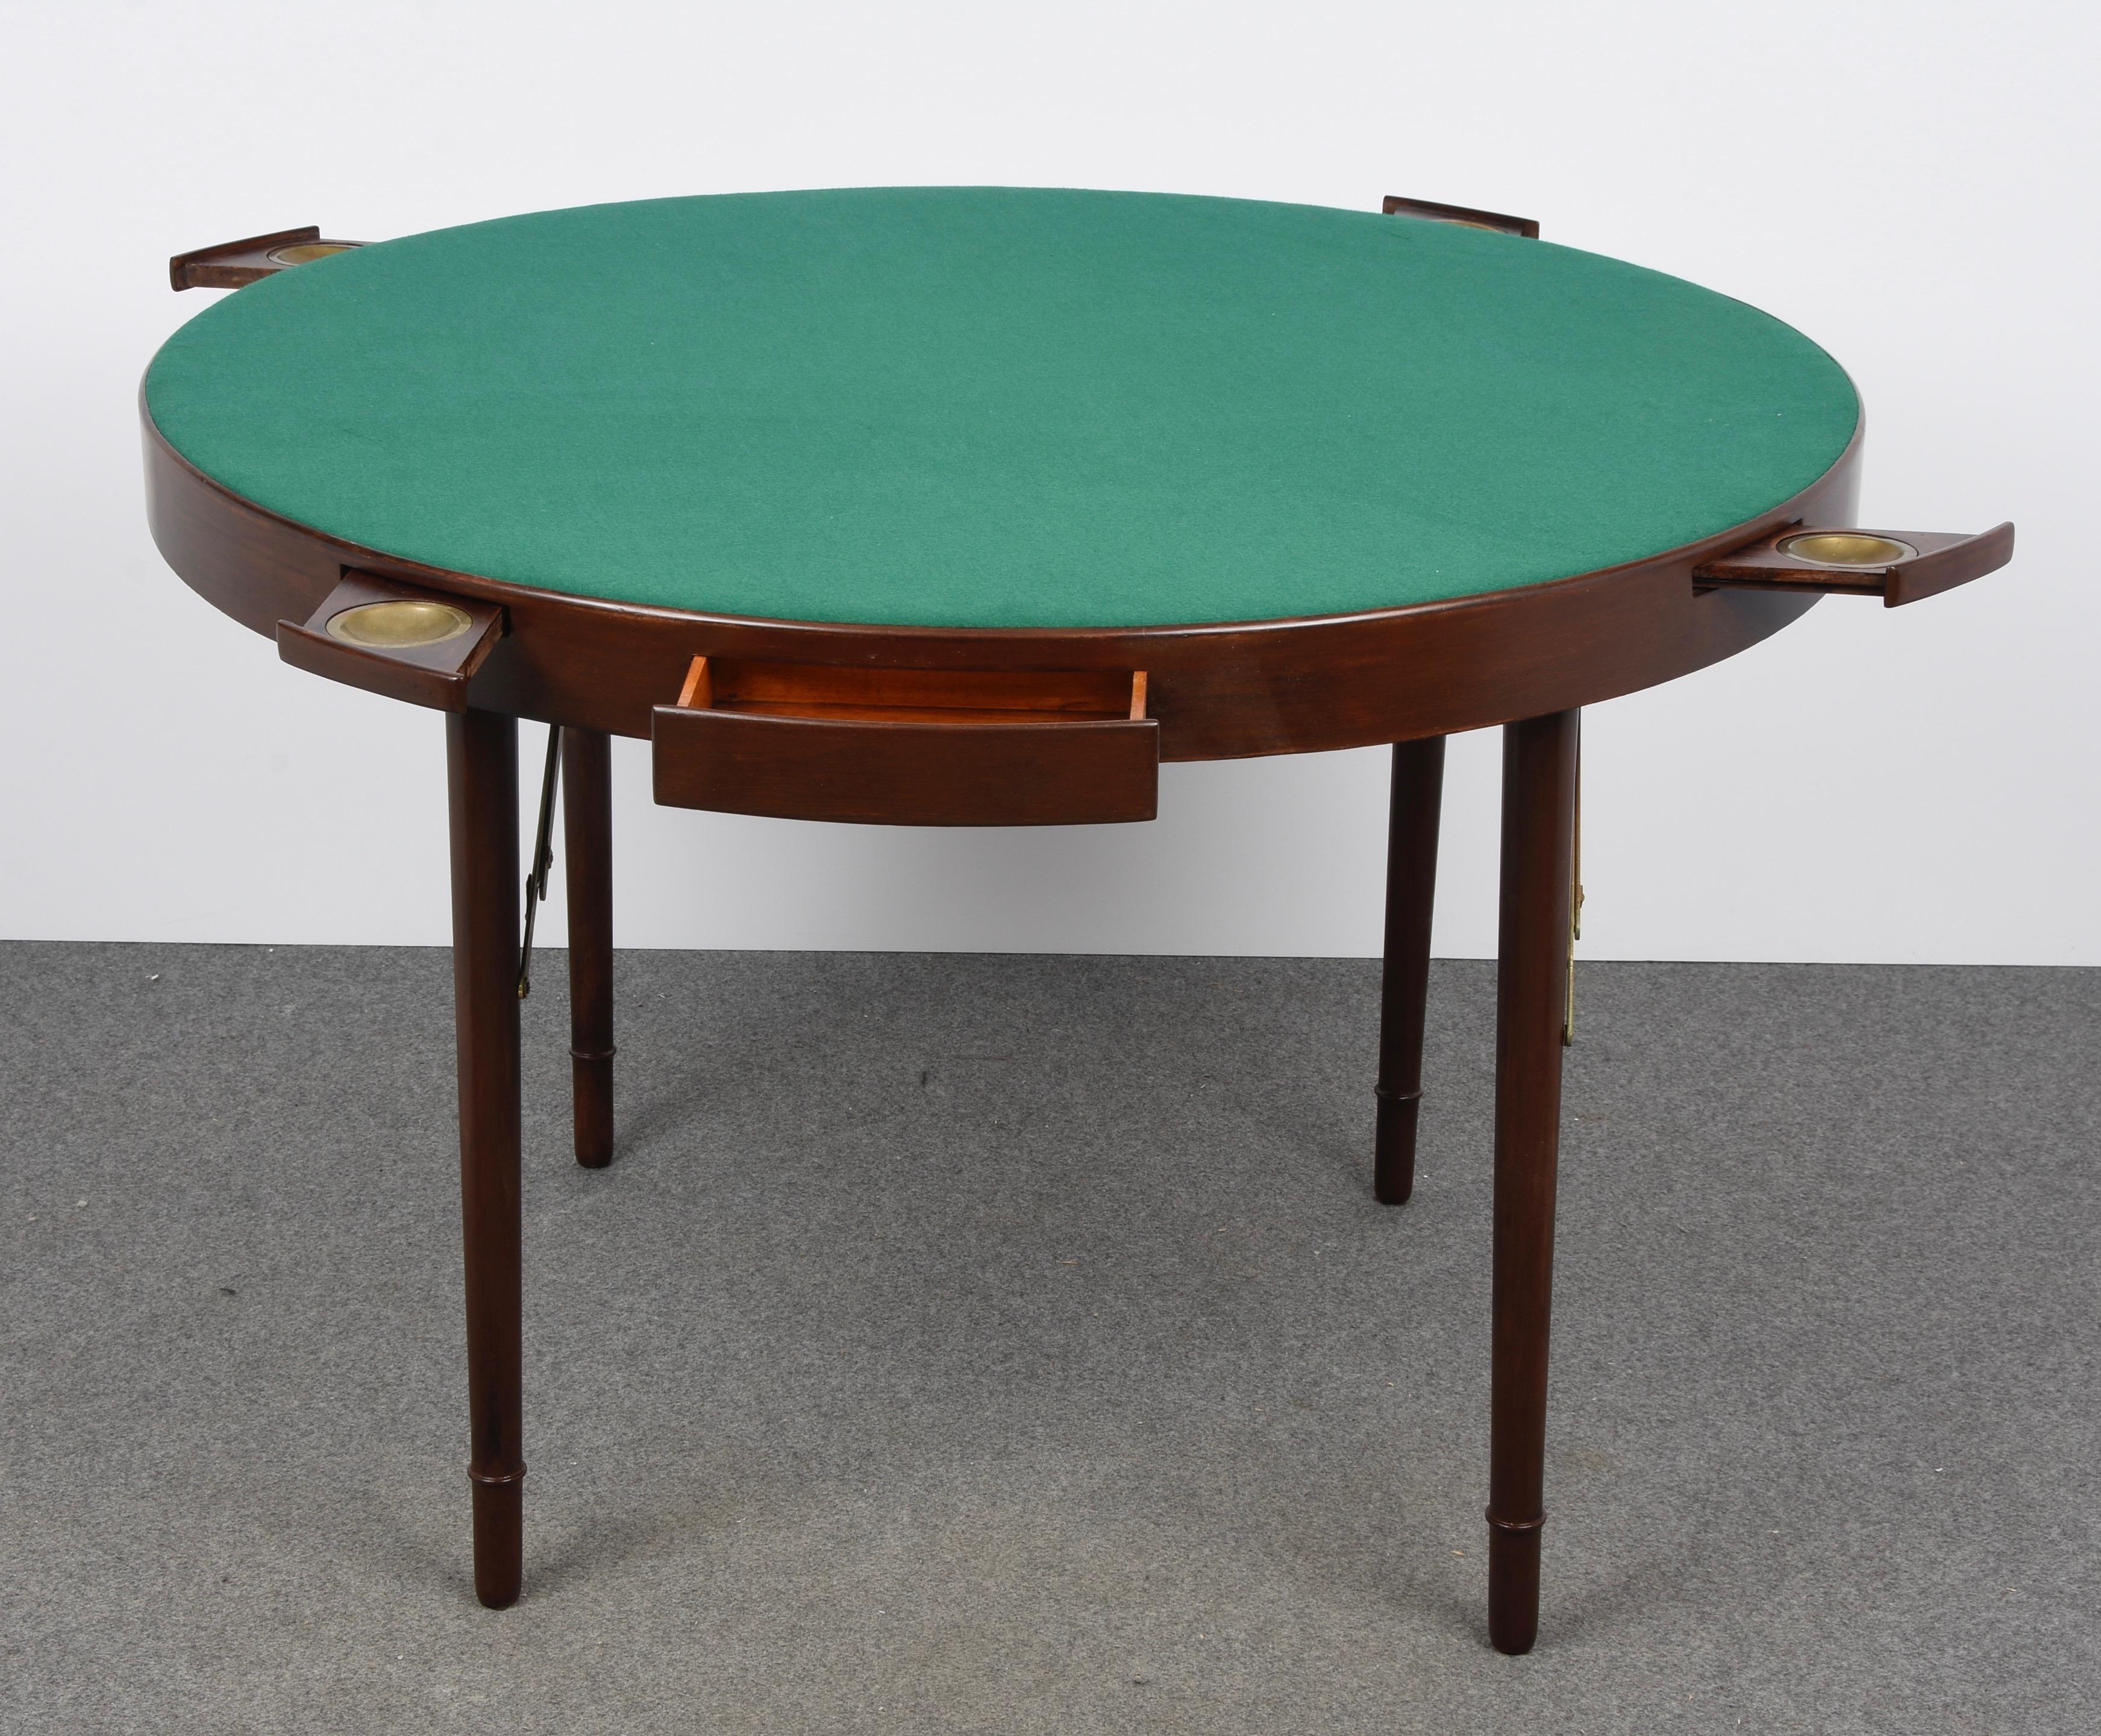 Superb round game table with wooden structure, two drawers and four removable ashtrays in solid brass. This fantastic item was designed by the Zari Brothers in Milano, Italy, during the 1950s.

This piece is unique as it is foldable, it has two